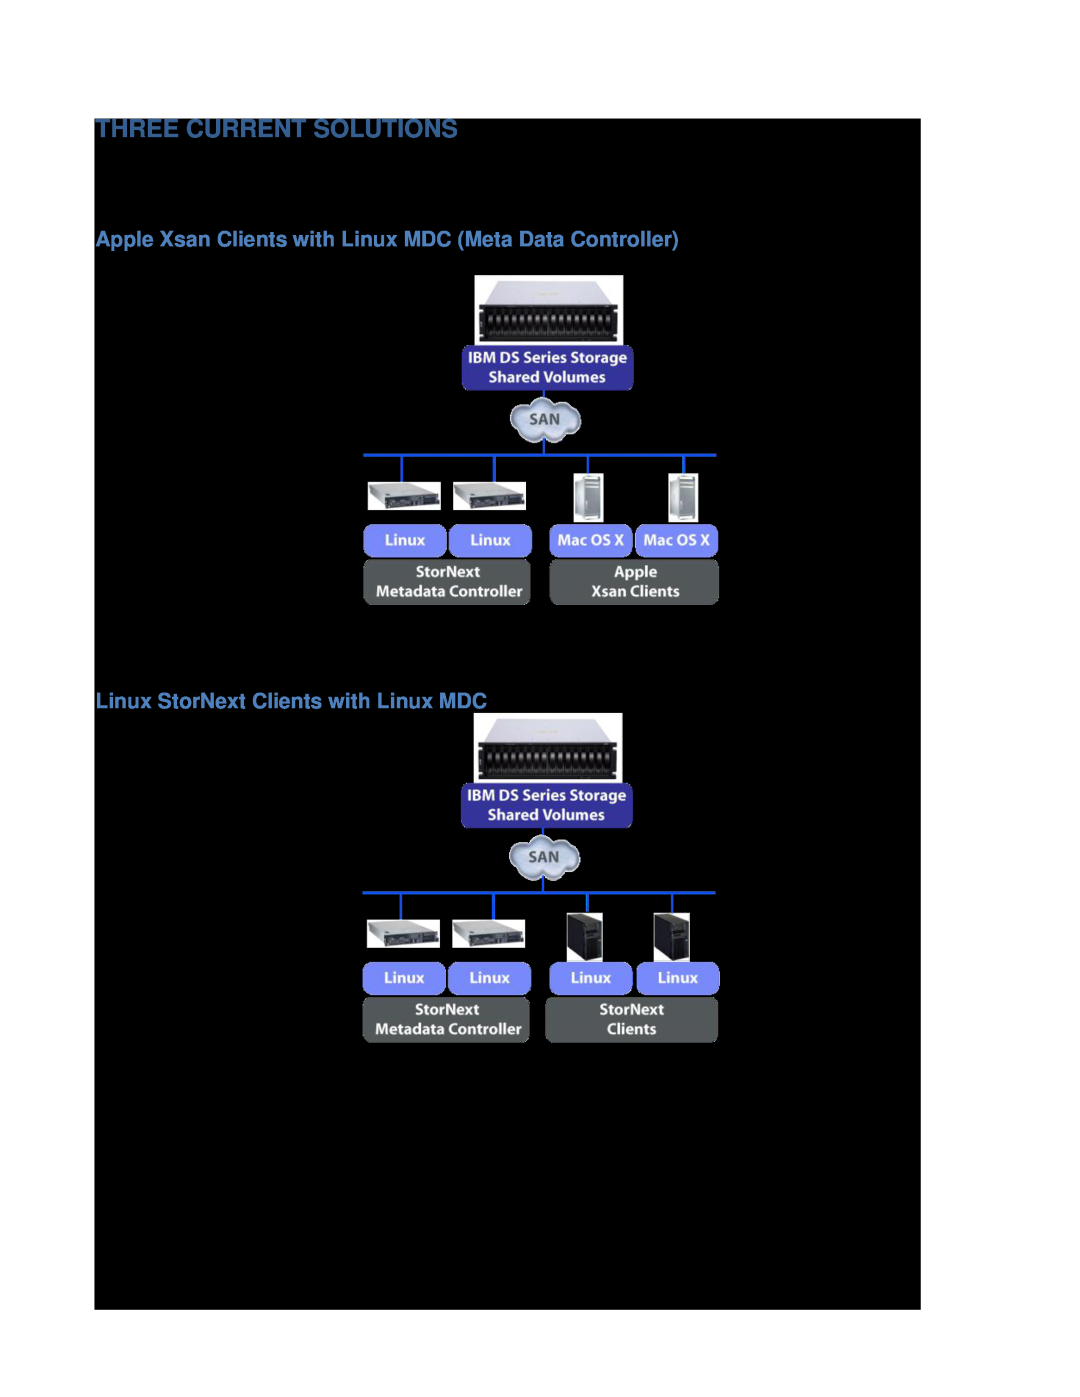 IBM DS4000, DS3000 manual Three Current Solutions, Linux StorNext Clients with Linux MDC, Apple Homogenous, Linux Homogenous 